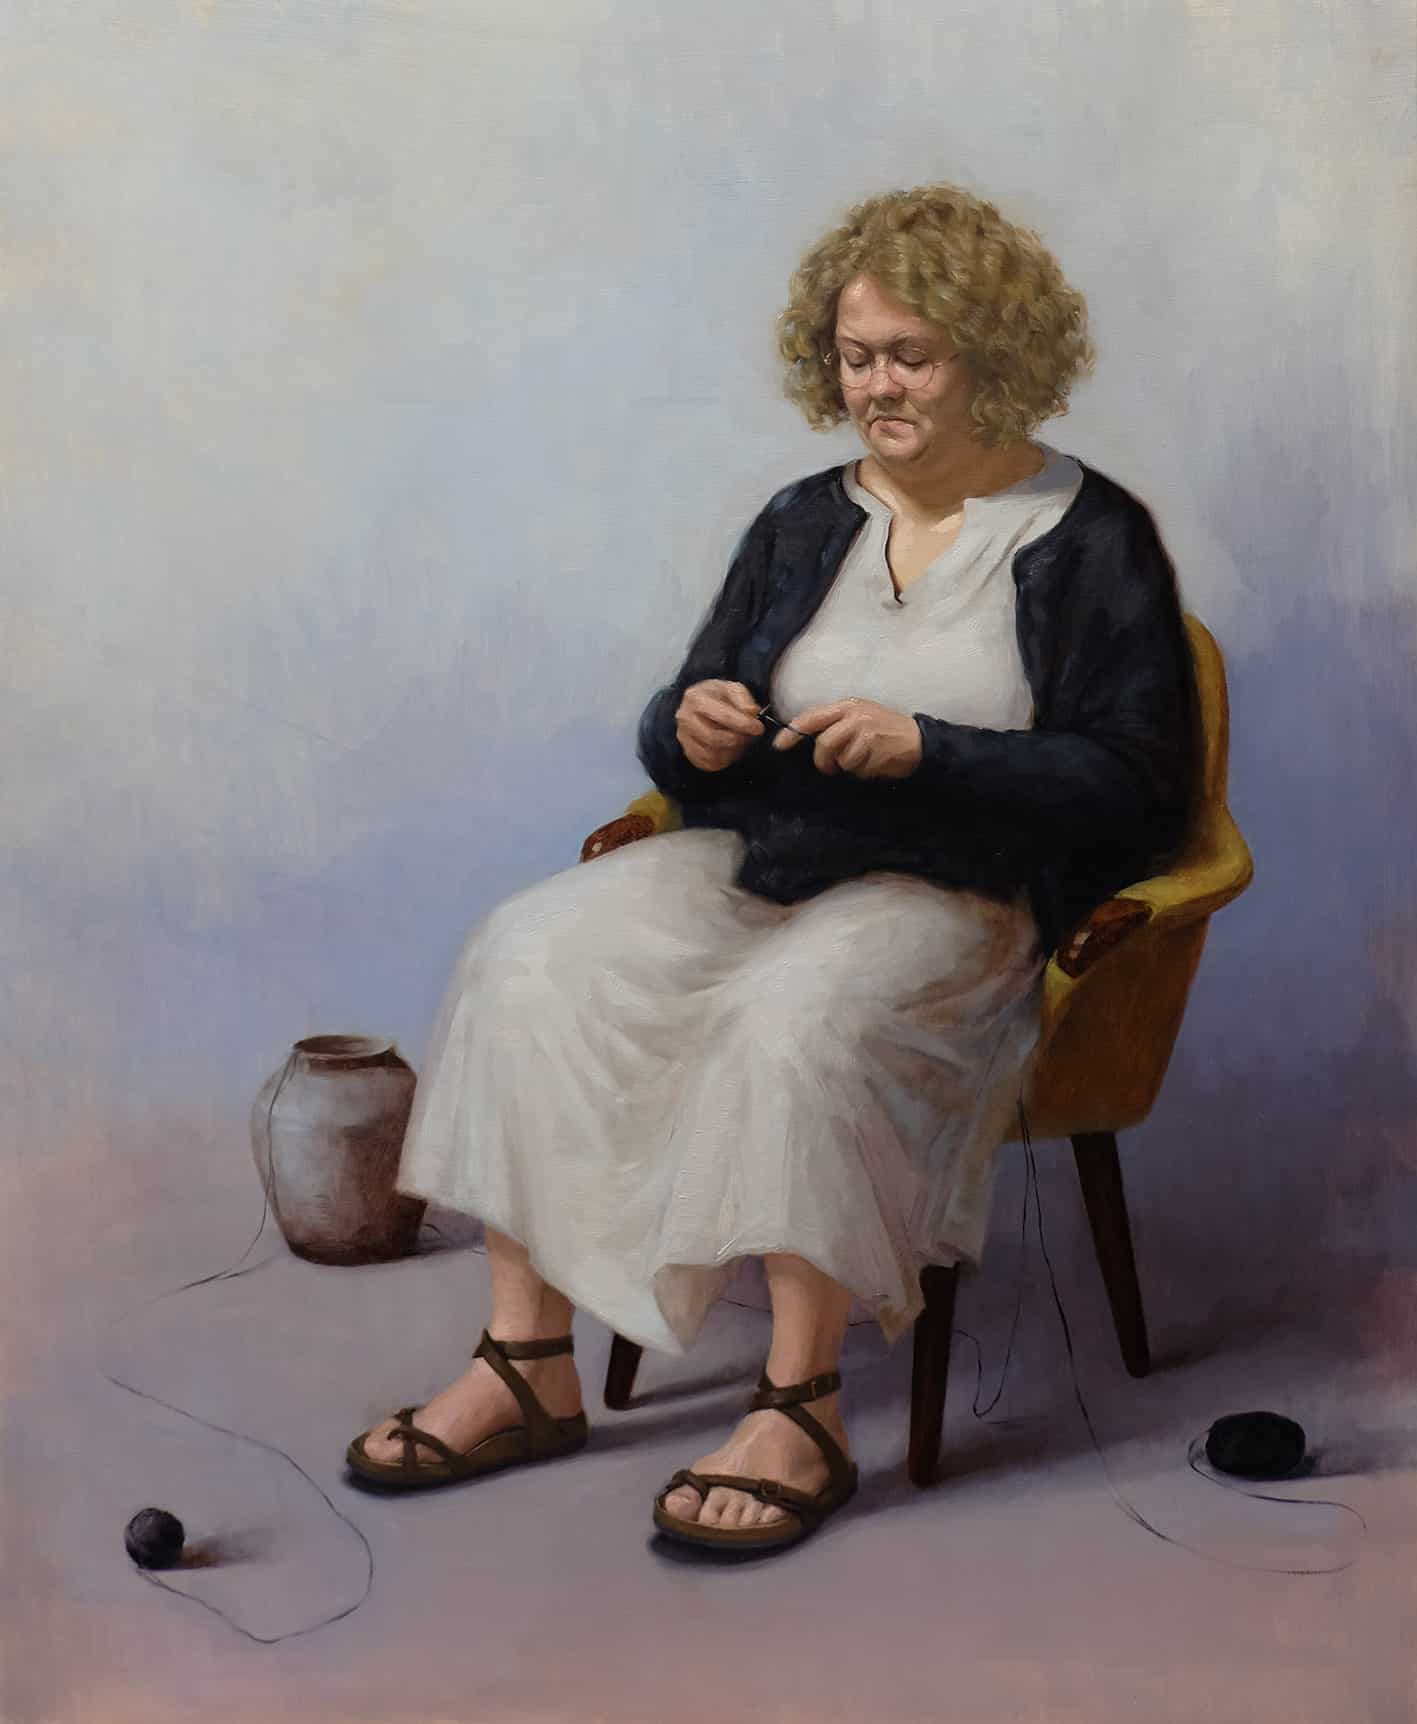 Anne Koldsø, "Quiet preperations for convent life", Oil on canvas 60 x 73 cm, 2020